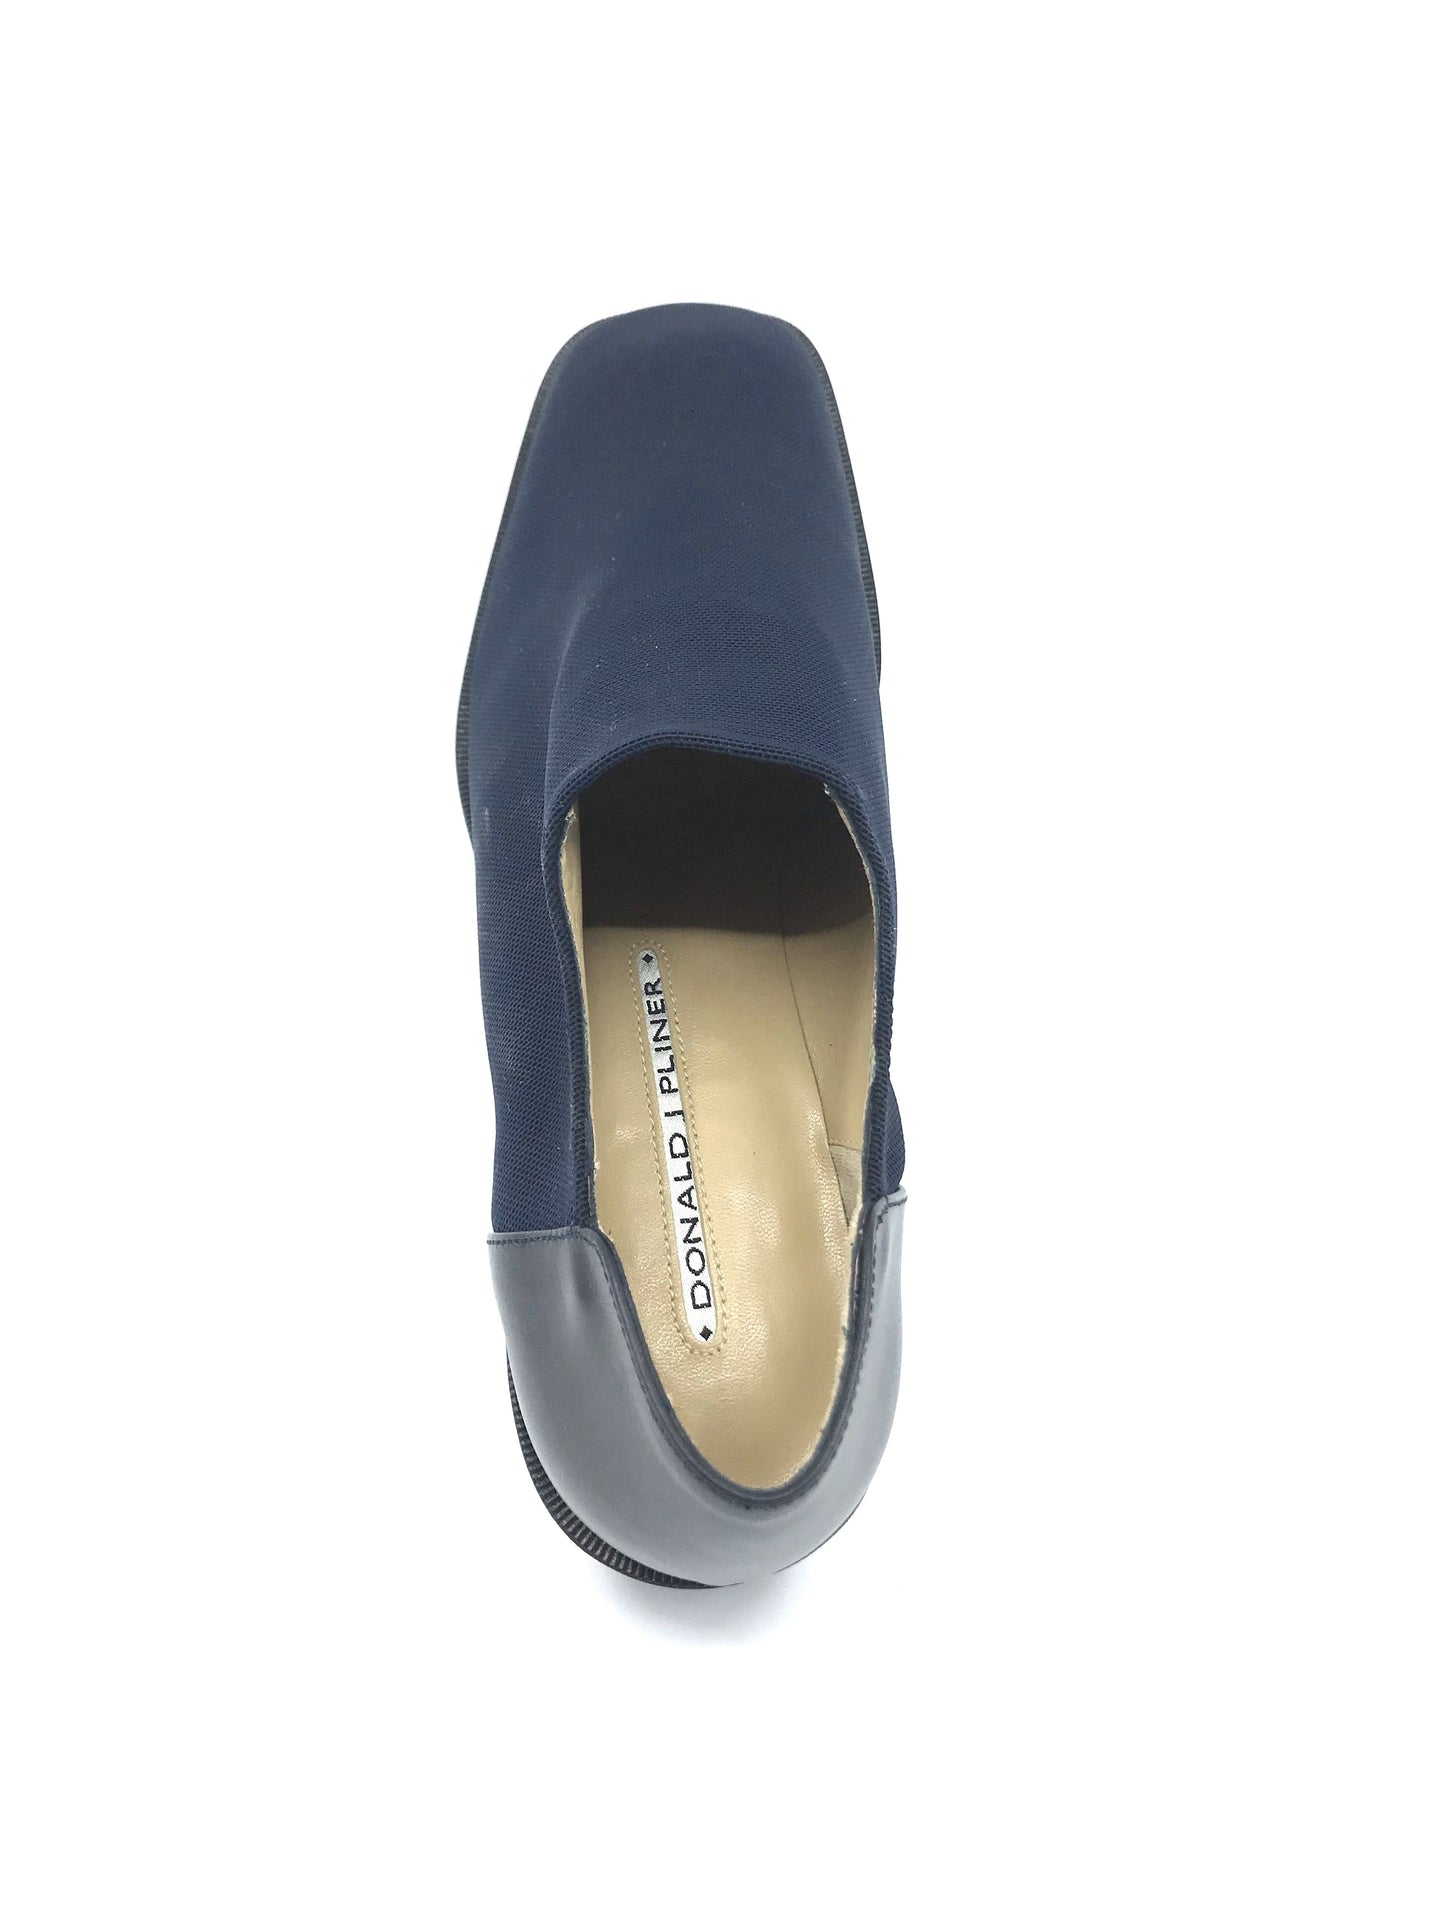 Love Navy Fabric and Leather Donald Pliner Loafer Pumps